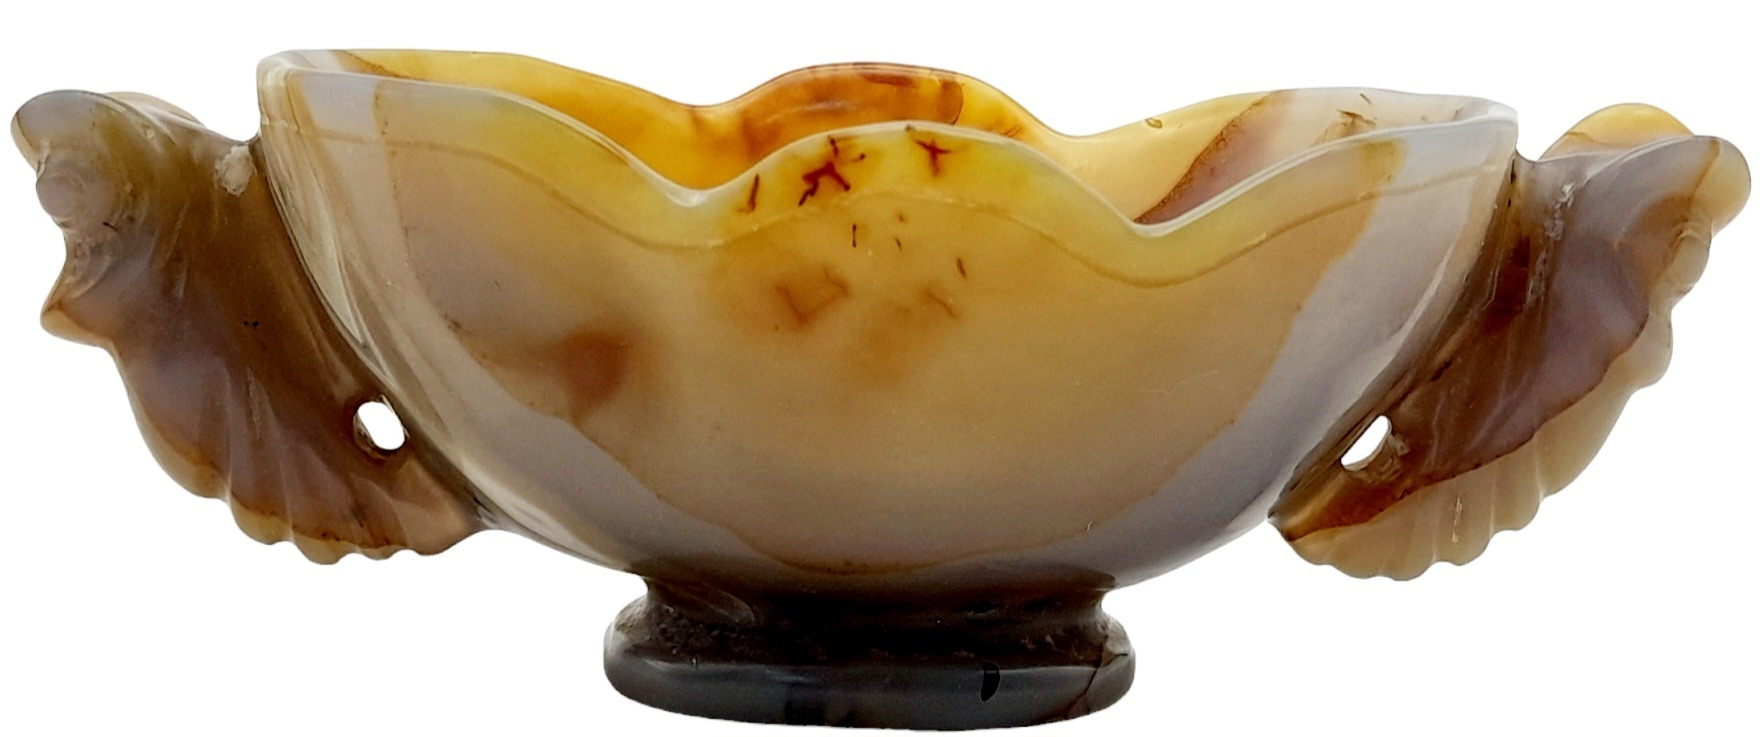 A Vintage Chinese Hand Carved Agate Bowl with Ornate Seaworm Decoration. 16cm x 6cm. - Image 3 of 5